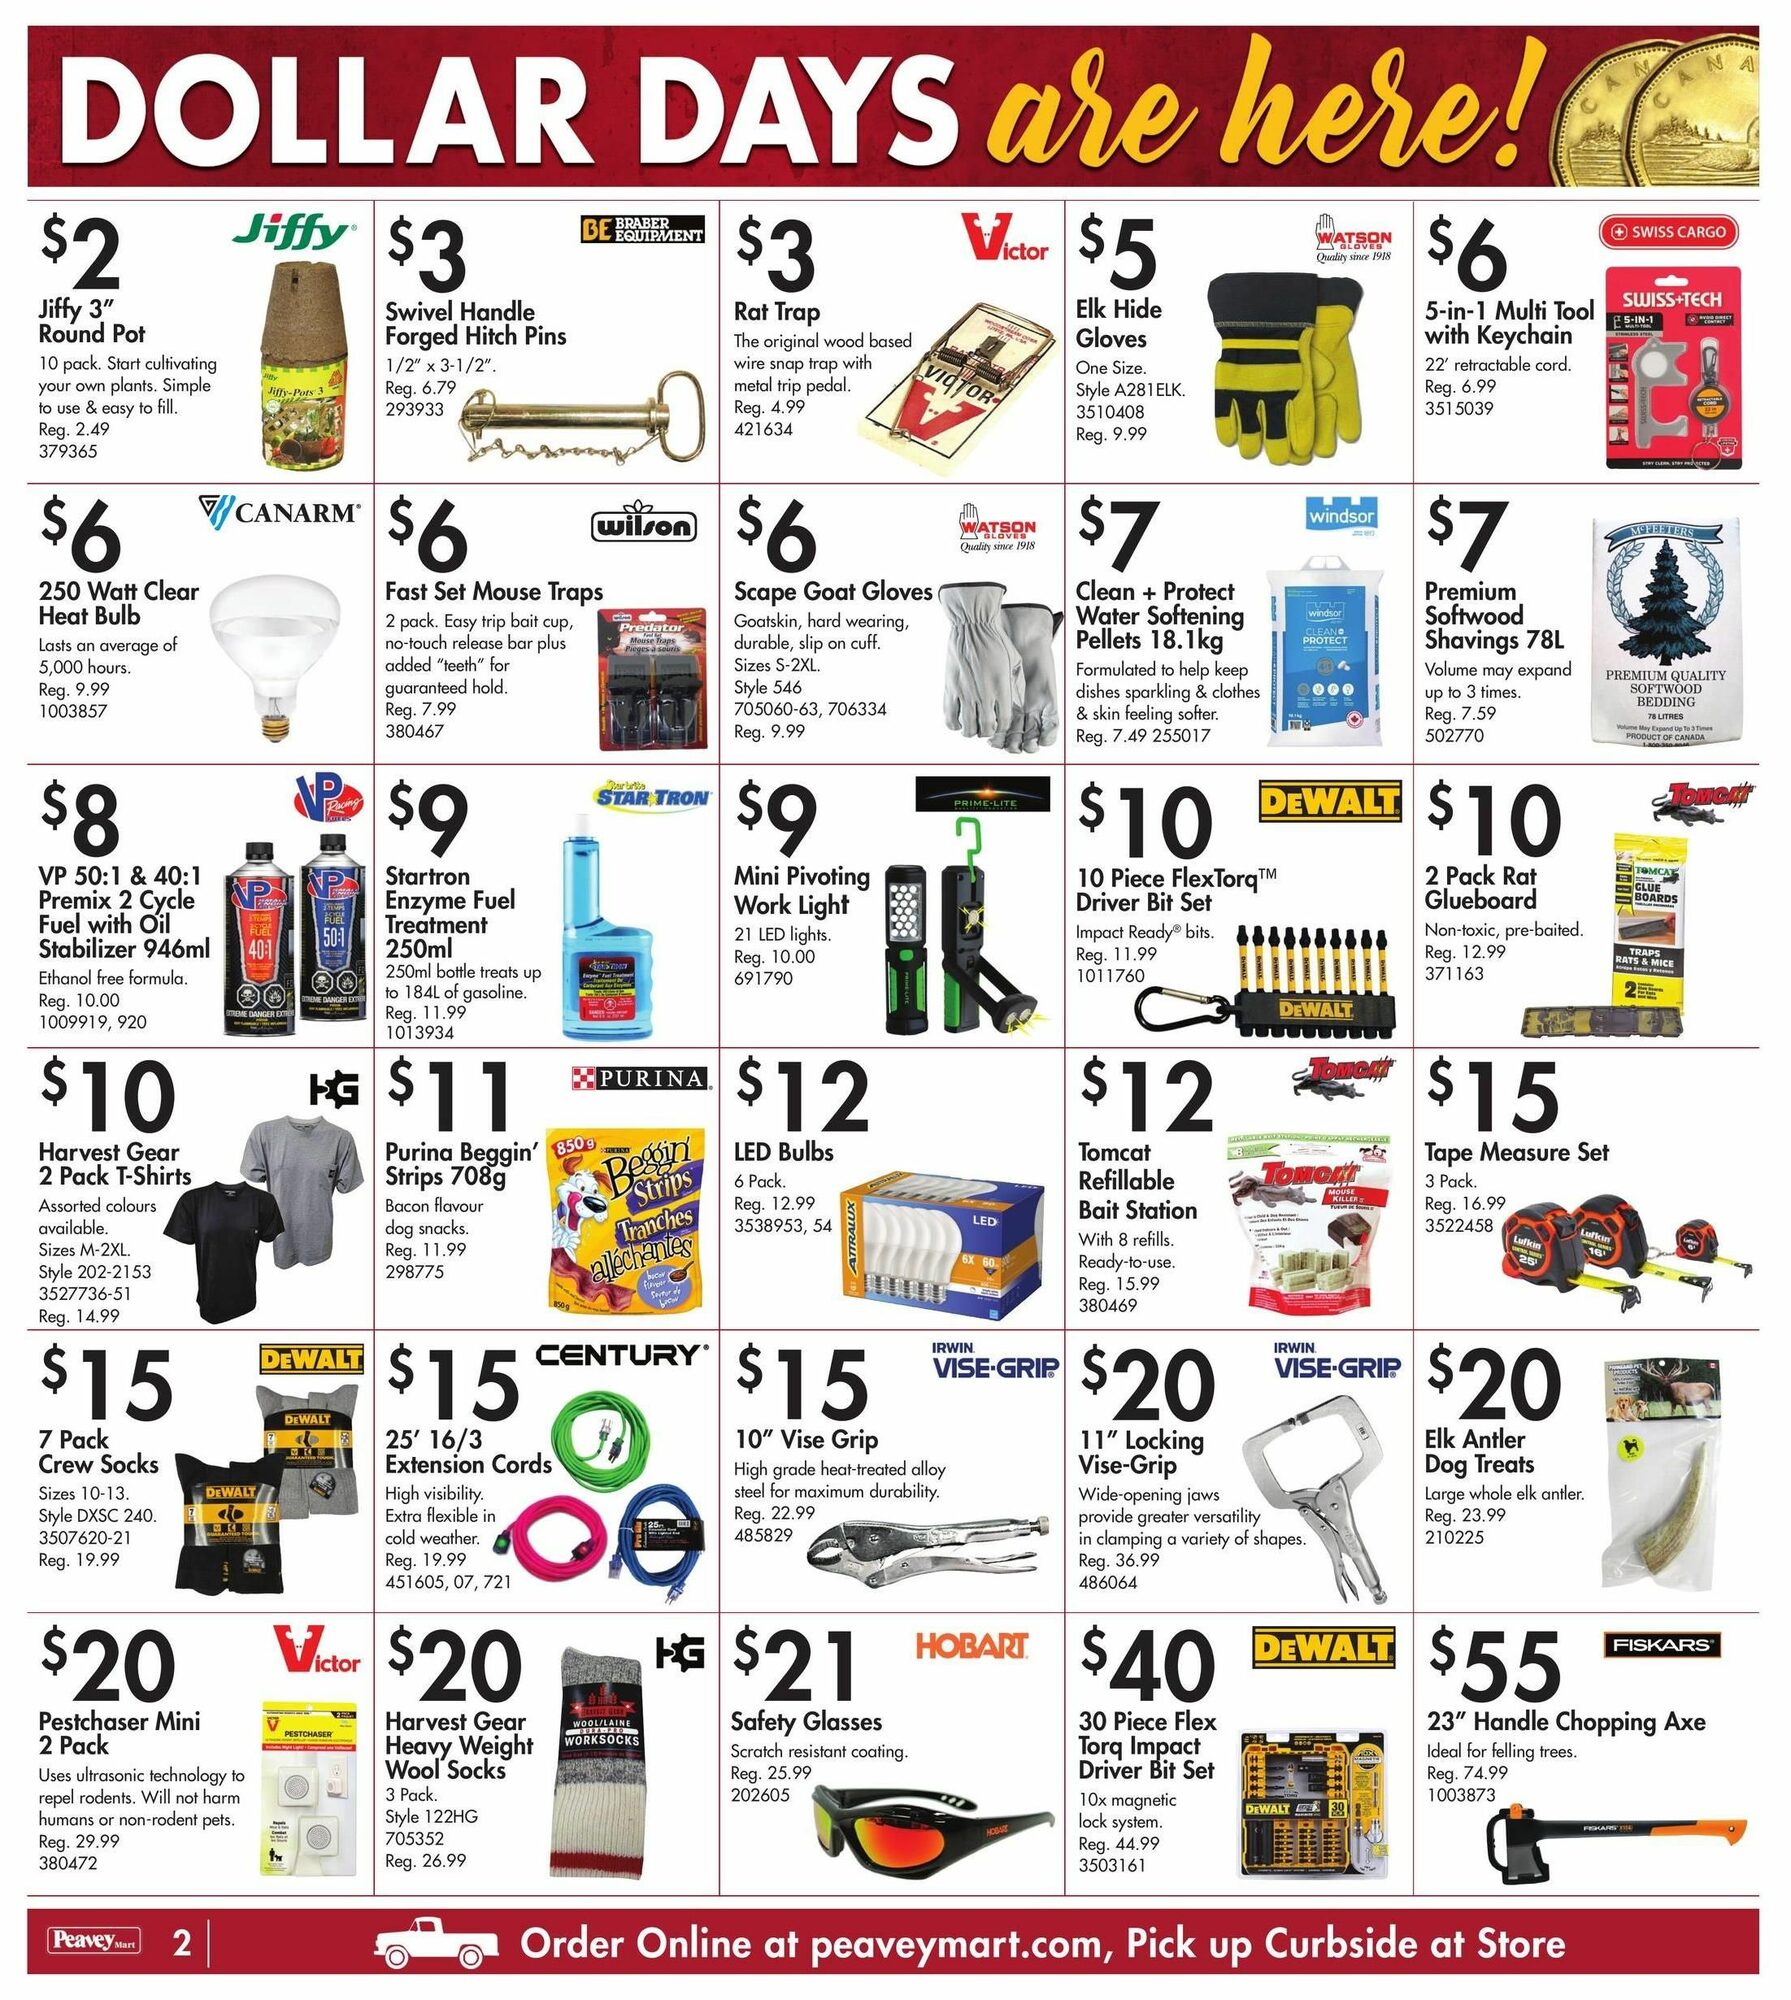 Peavey Mart - Weekly Flyer Specials - Dollar Days - Page 3